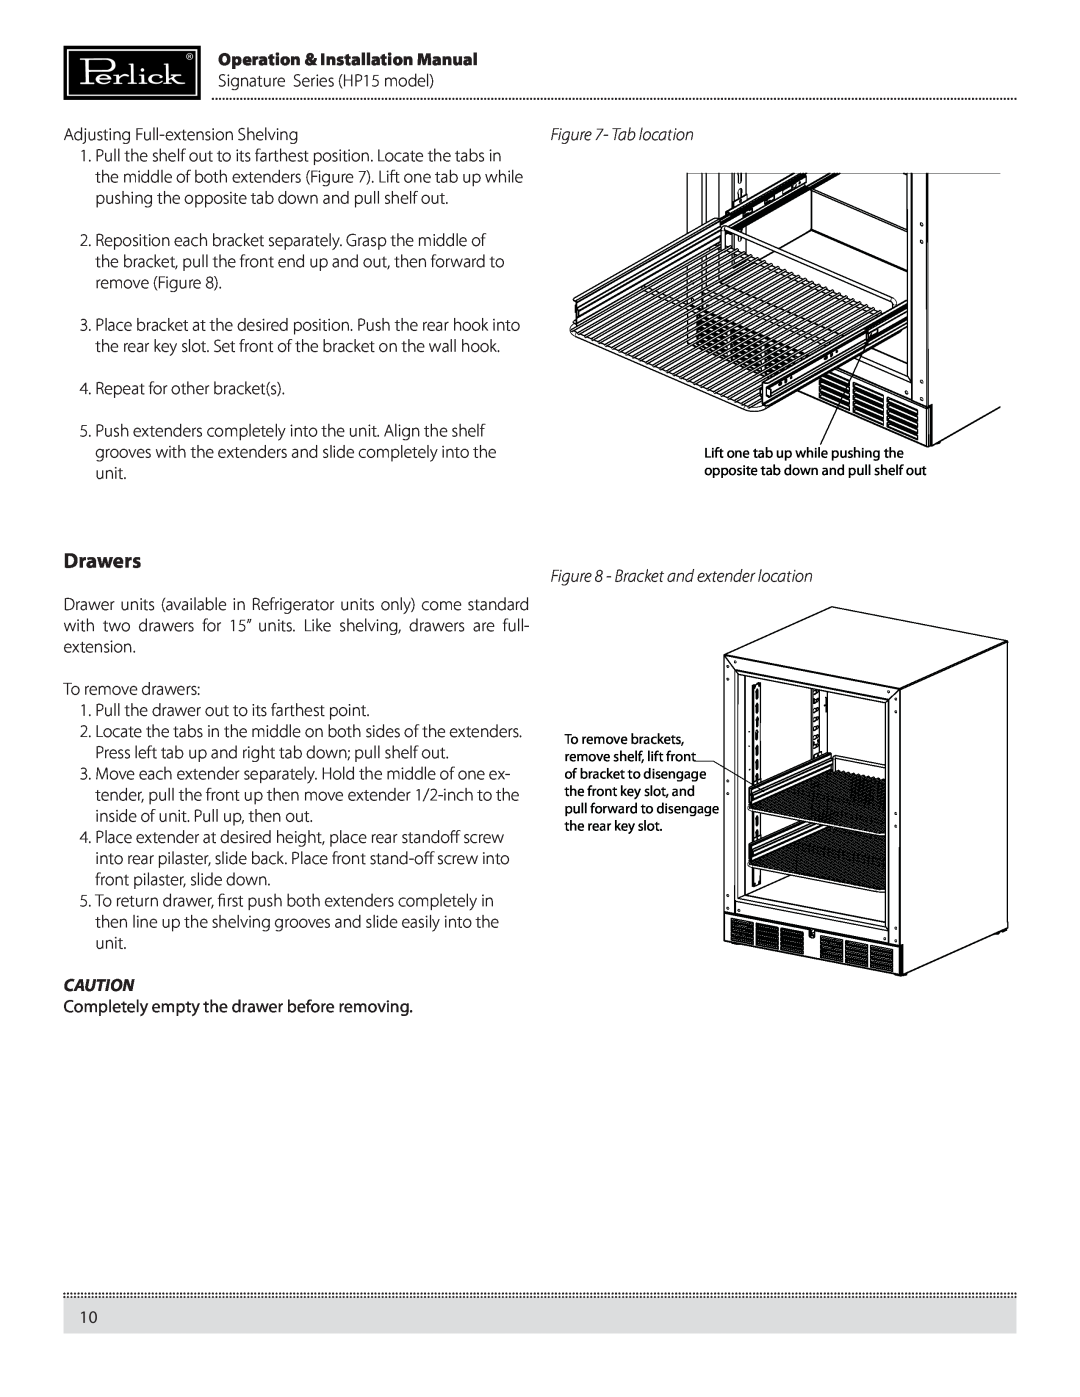 Perlick HP15RS, HP15BS manual Drawers, Tab location, Bracket and extender location, Operation & Installation Manual 